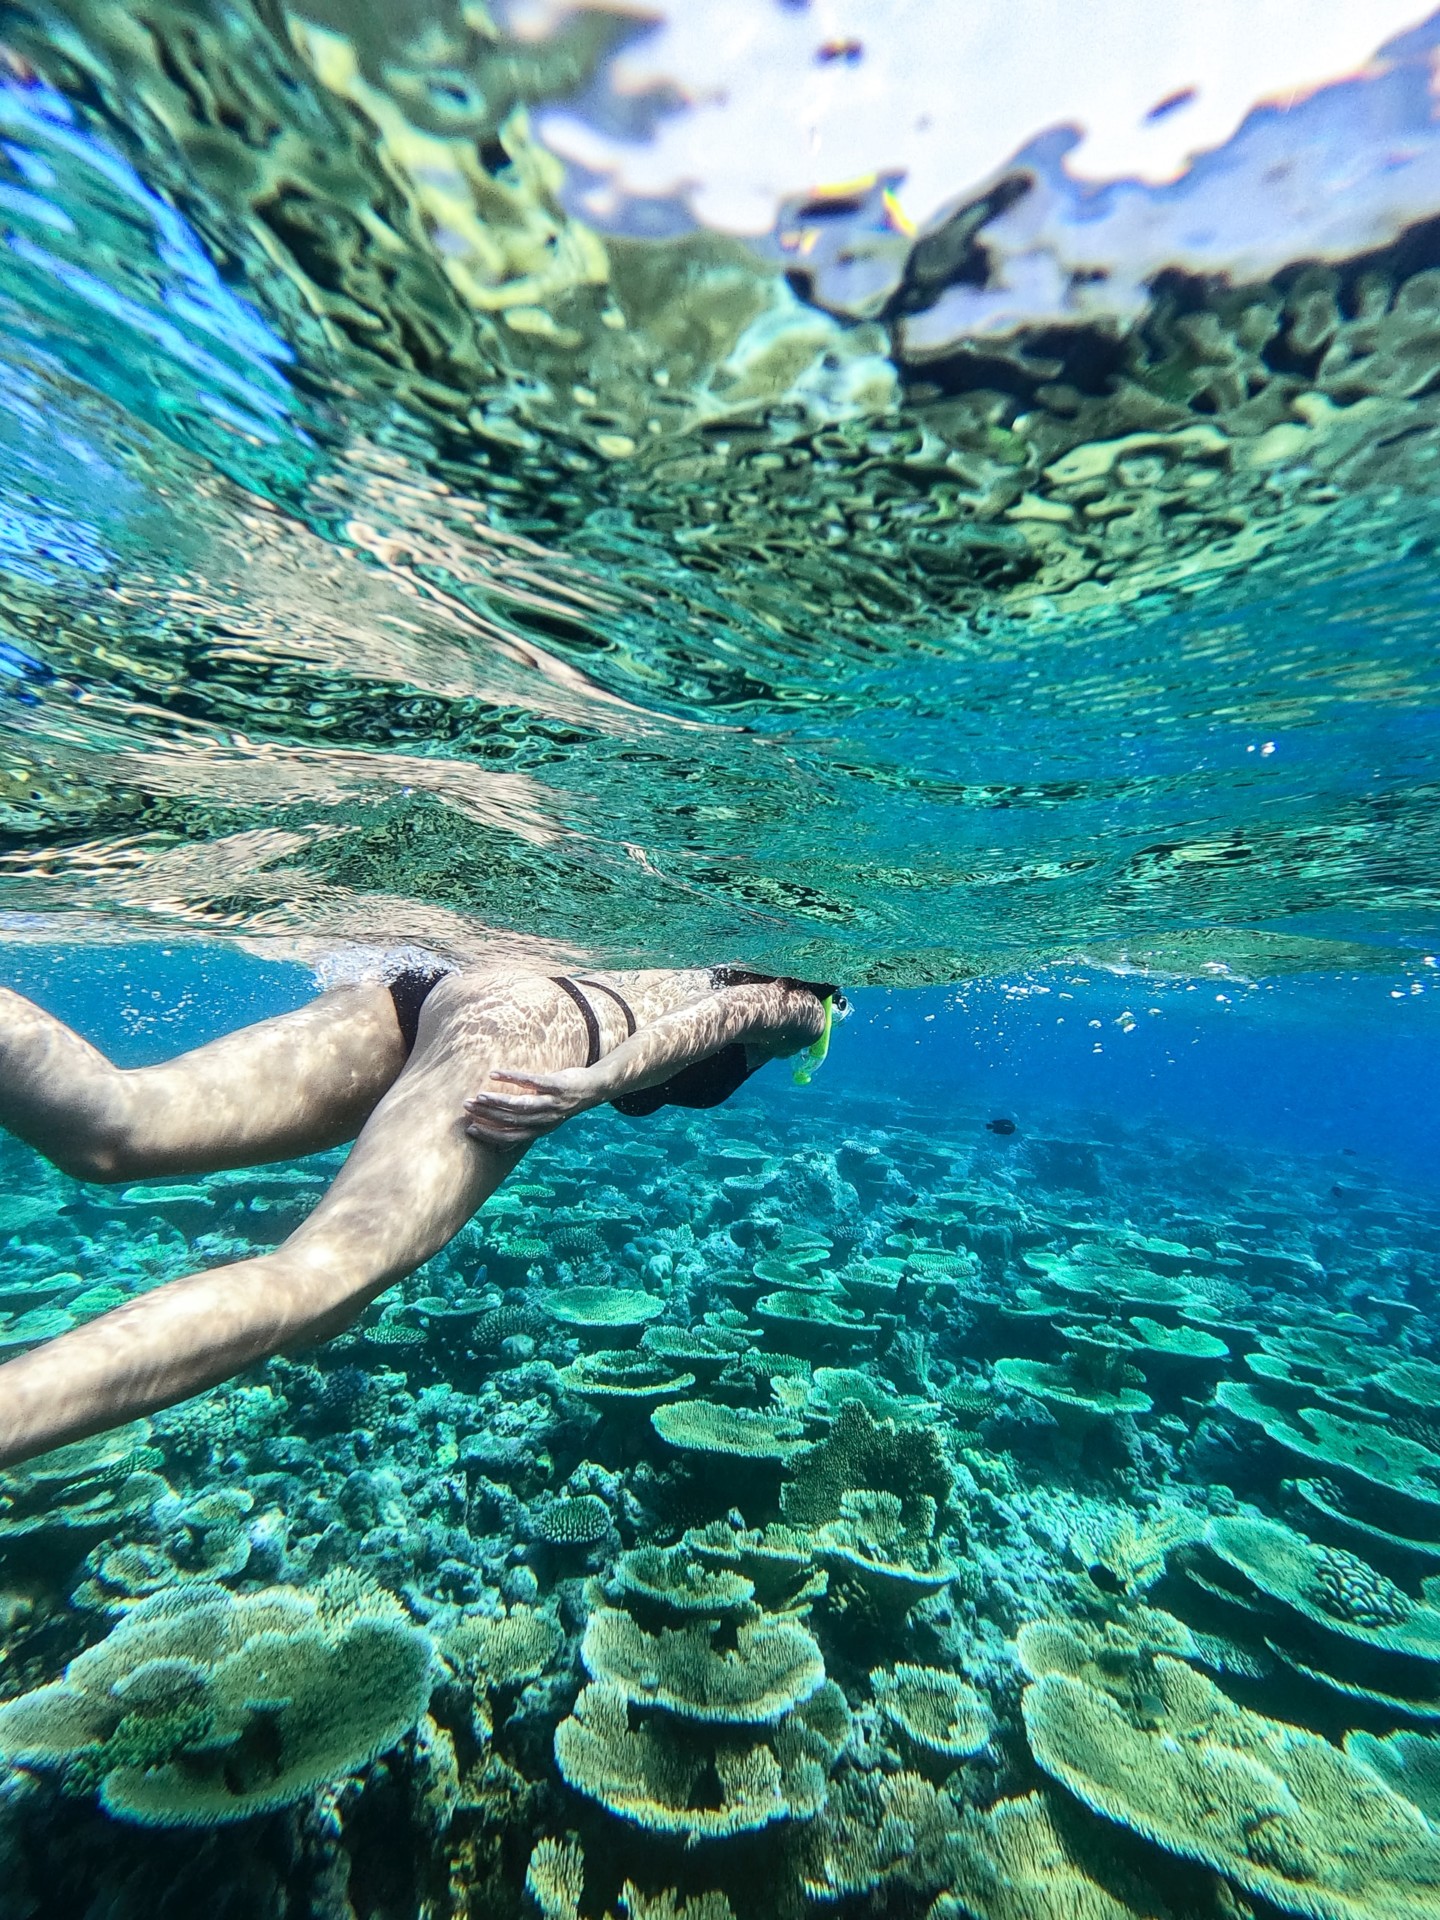 How Does Snorkeling Affect Coral Reefs